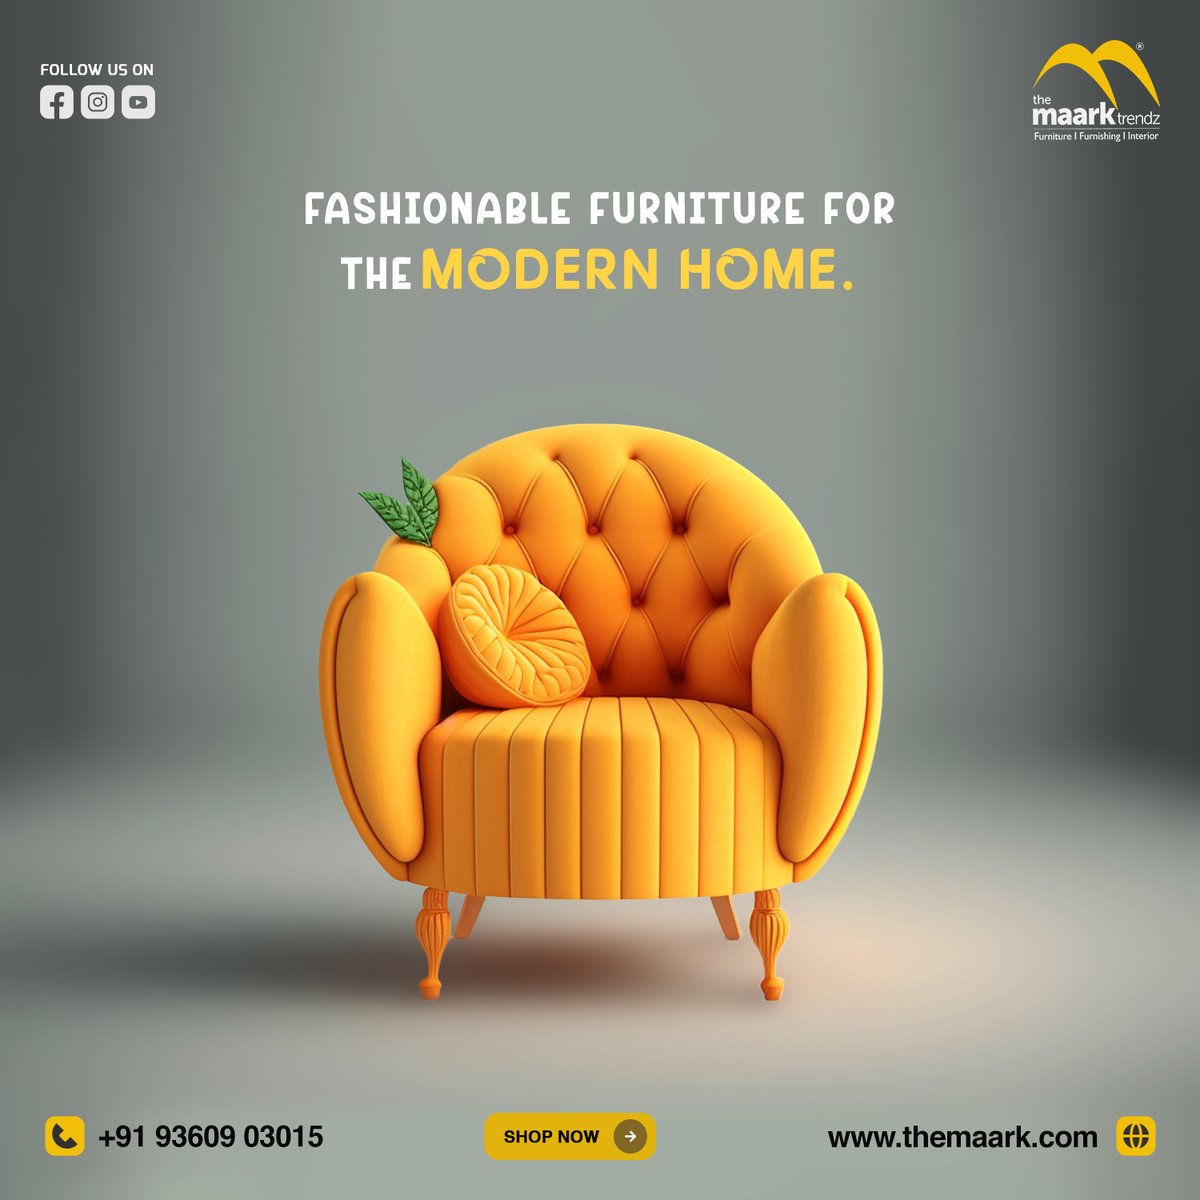 The Maark Trendz. Coimbatore | Tirupur | Erode Call +91 96778 23456/ +91 96778 33337 Create a space with stylishly pleasing couches that's comfortable for everyday living. Think about innovative and sustainable features like Maark's elegant full-home furniture at Online Now.